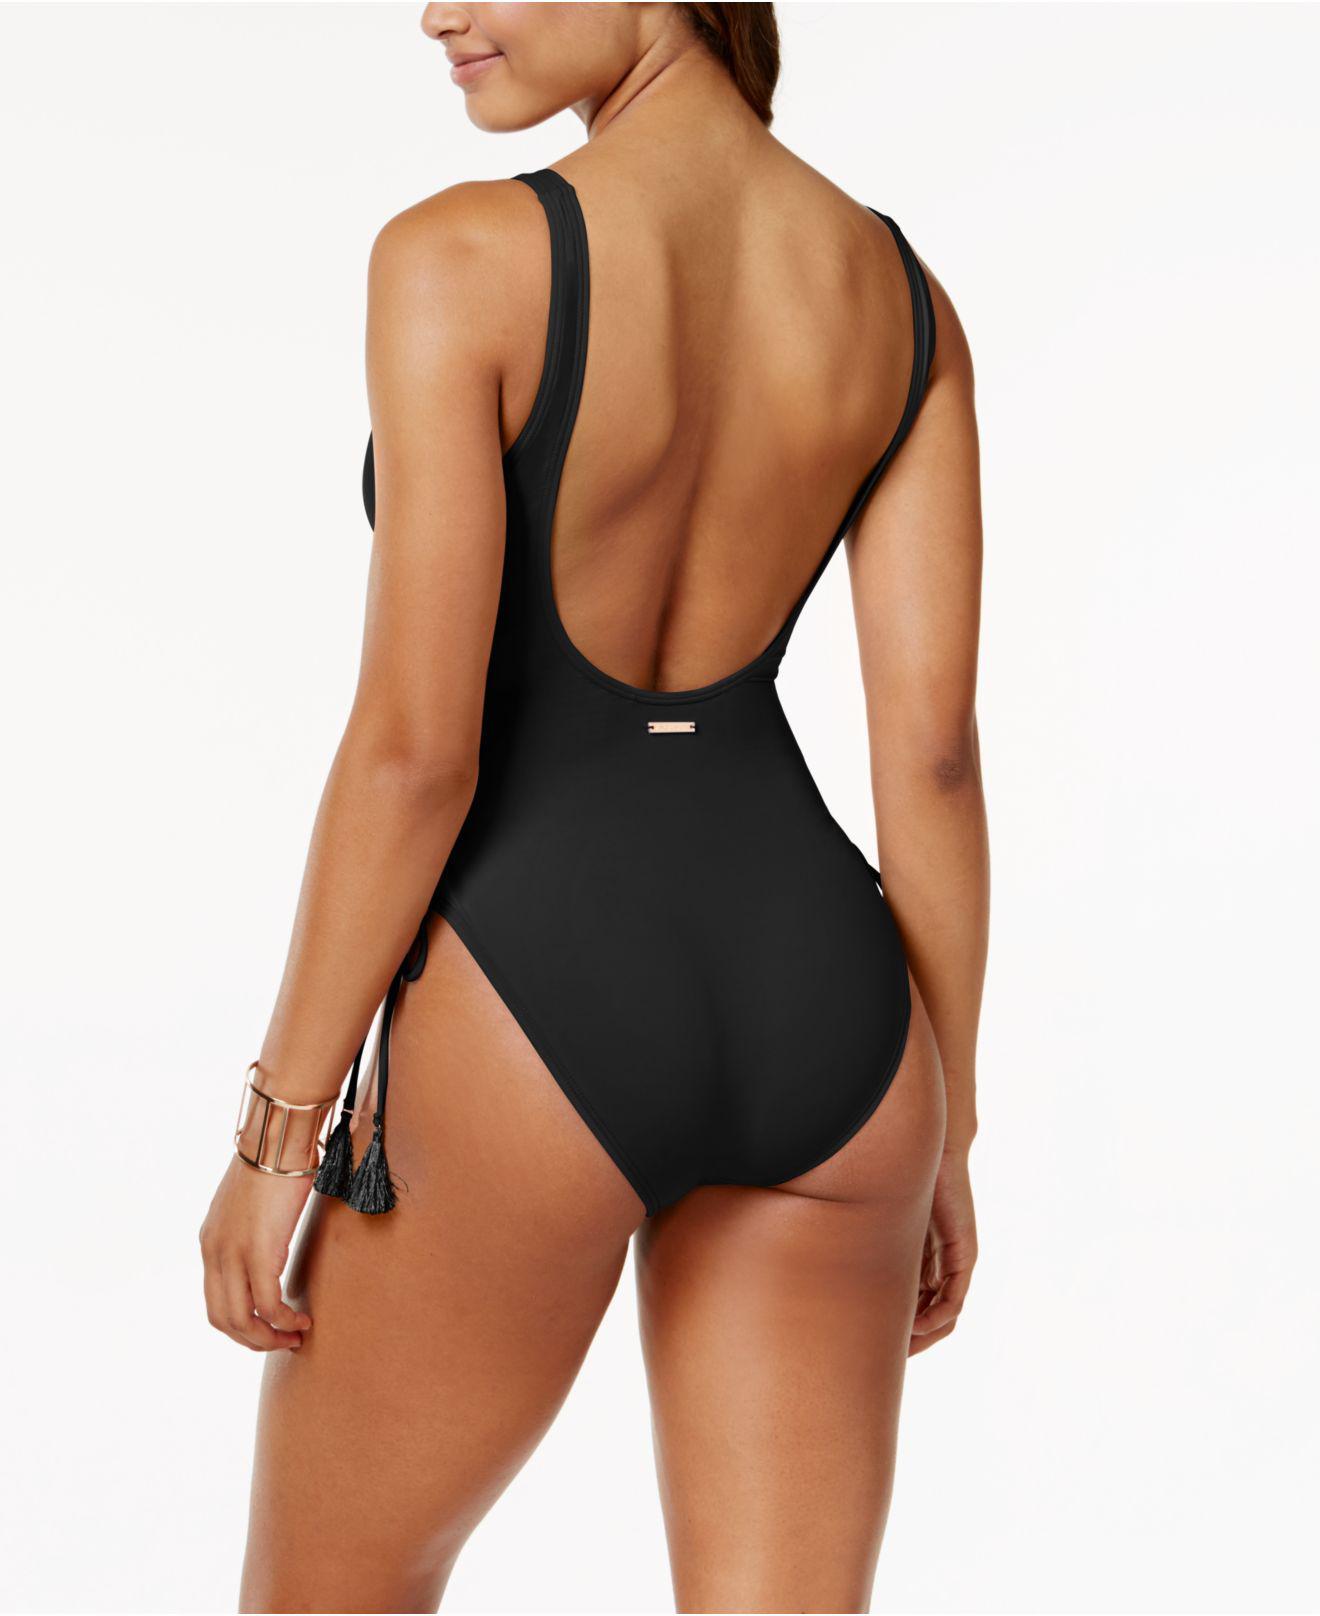 limiet temperament Opname Vince Camuto Riviera Side Lace-up One-piece High-leg Swimsuit in Black |  Lyst